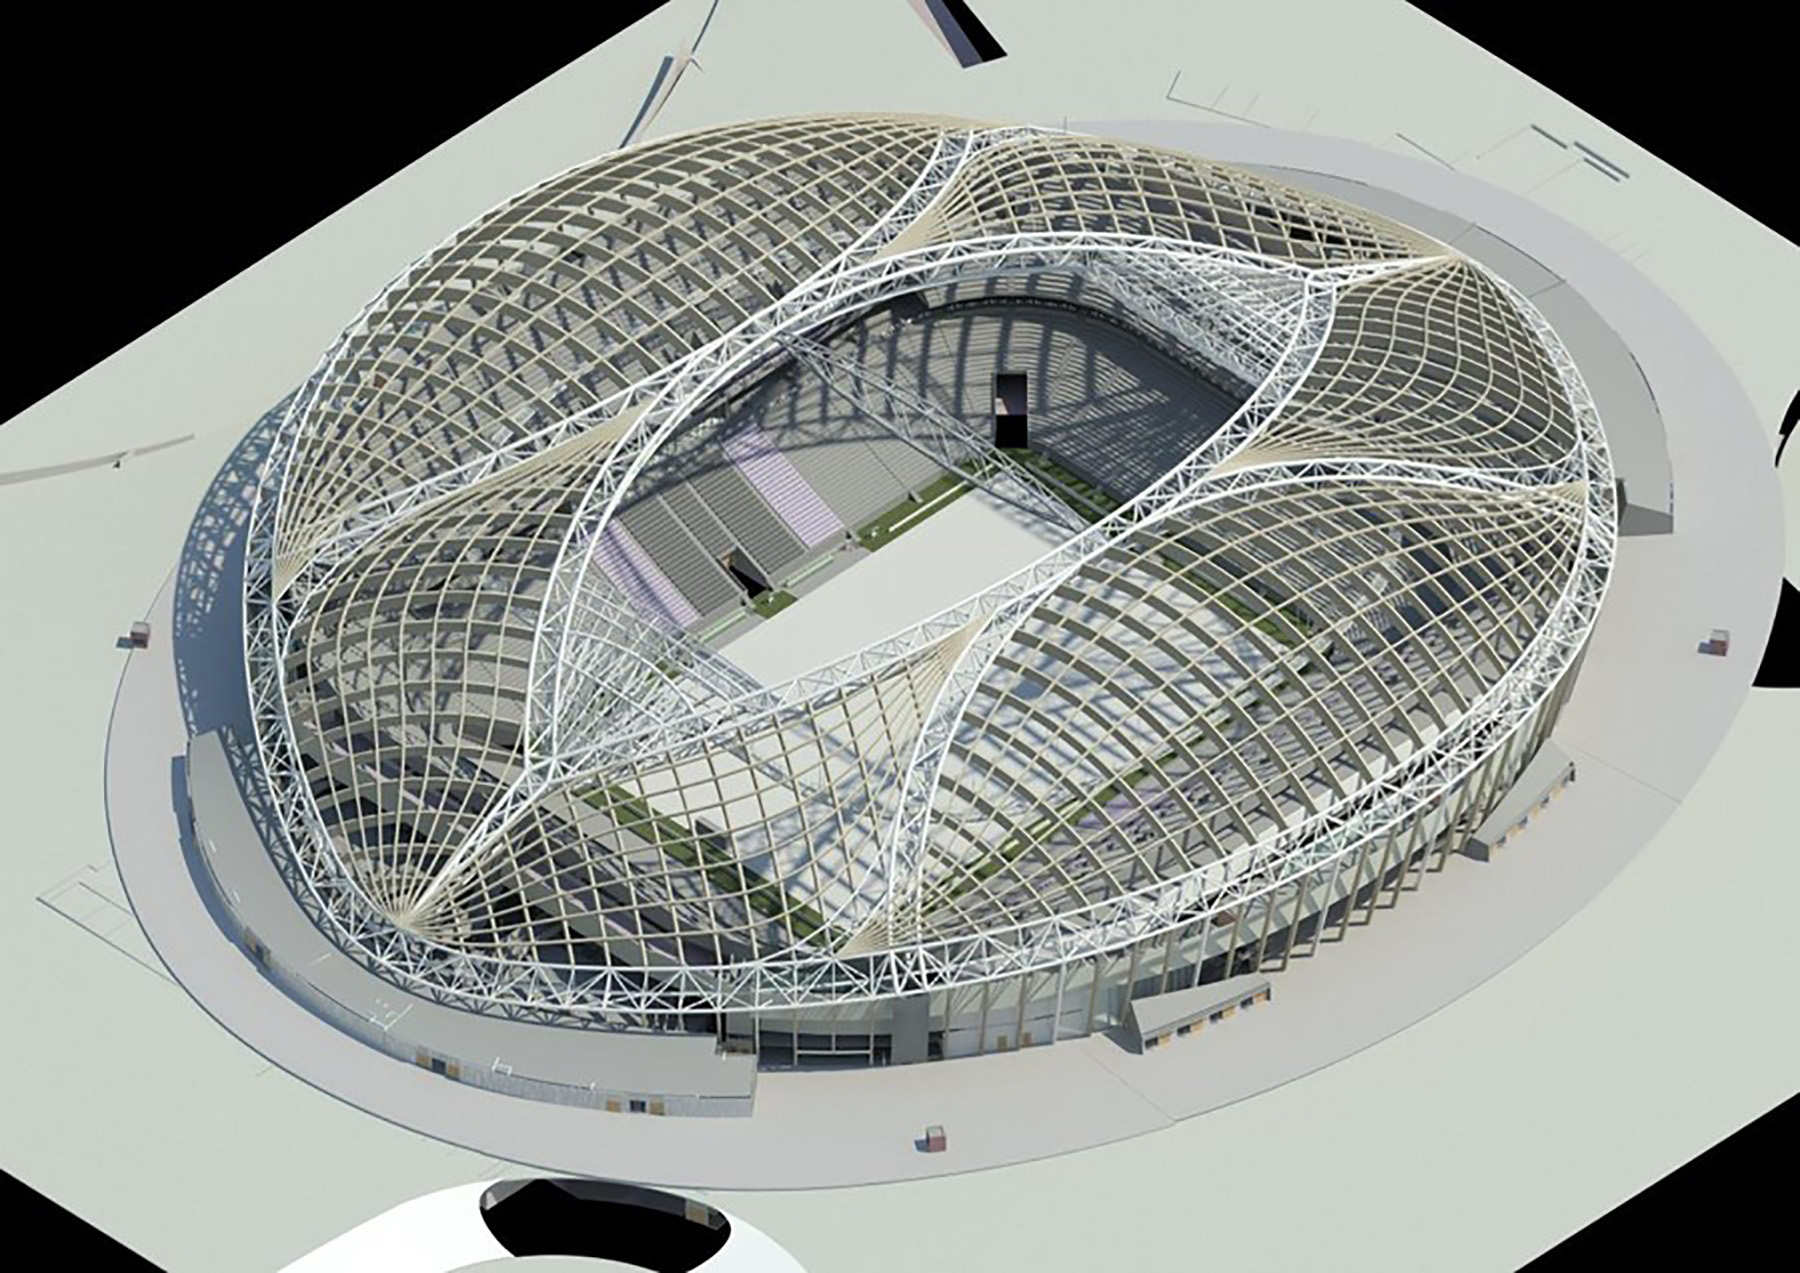 The rendering shows a structural model of the Al Janoub Stadium. 